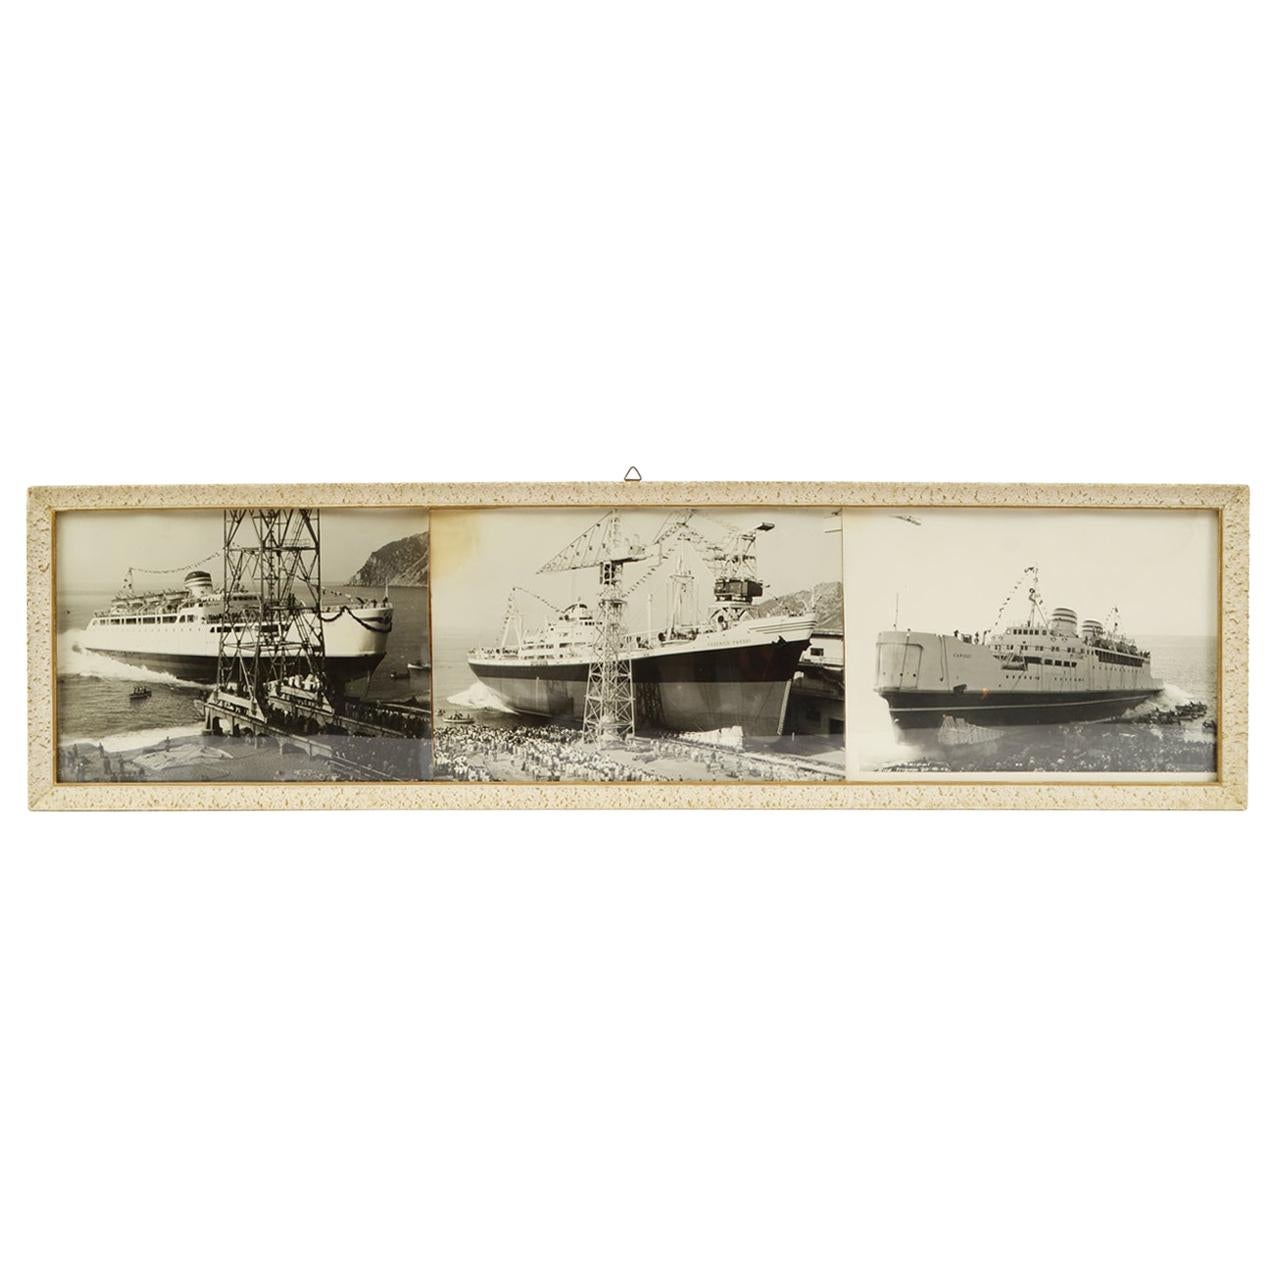 1950 Vintage Pictures Depicting Three Ships Launching  Riva Trigoso Shipyards 